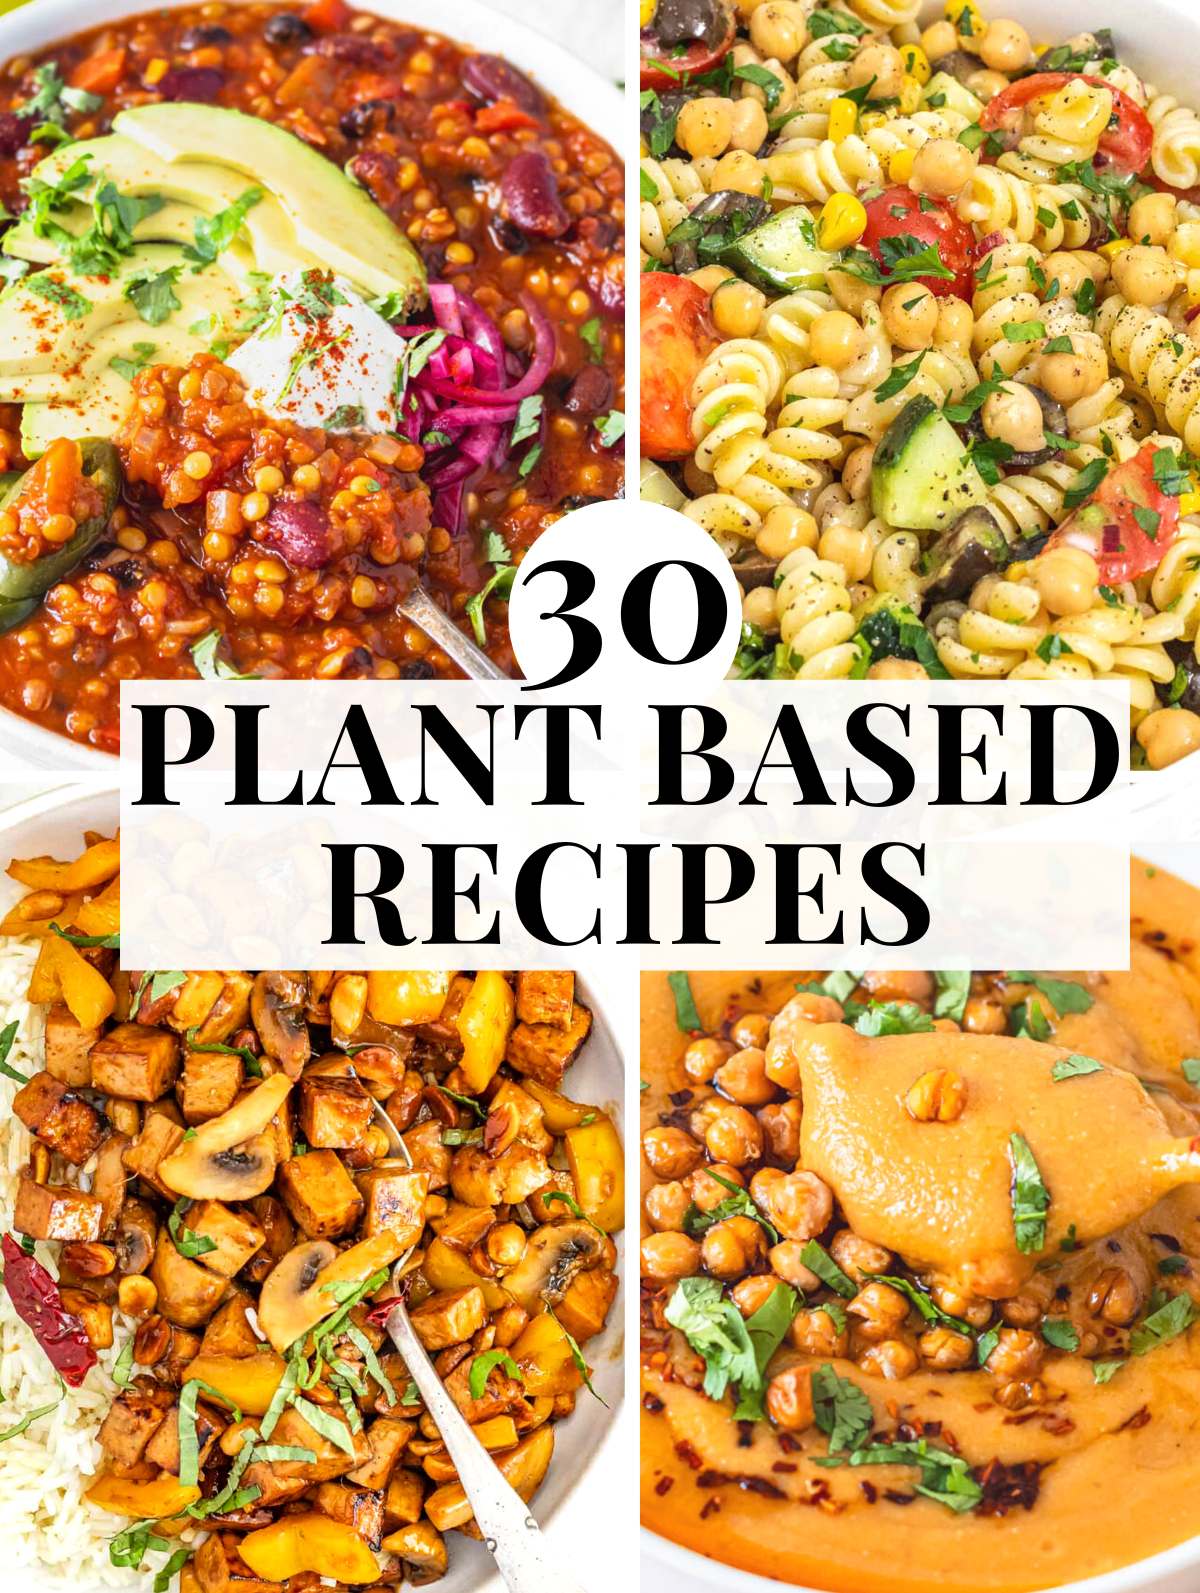 The Plant-Based Diet  A Begginer's Guide + Recipes and Tips